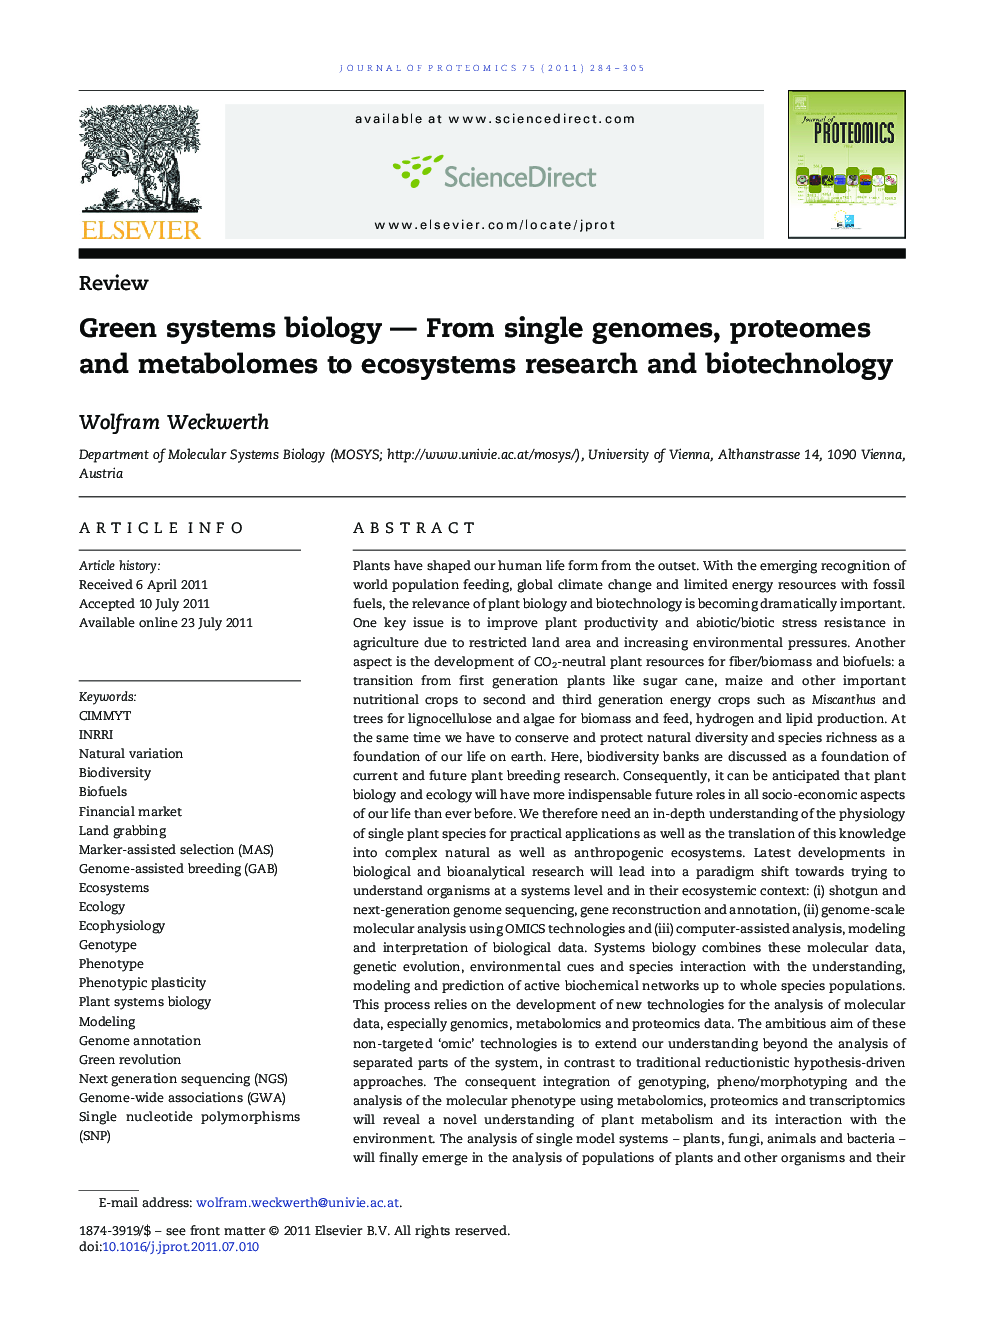 Green systems biology - From single genomes, proteomes and metabolomes to ecosystems research and biotechnology